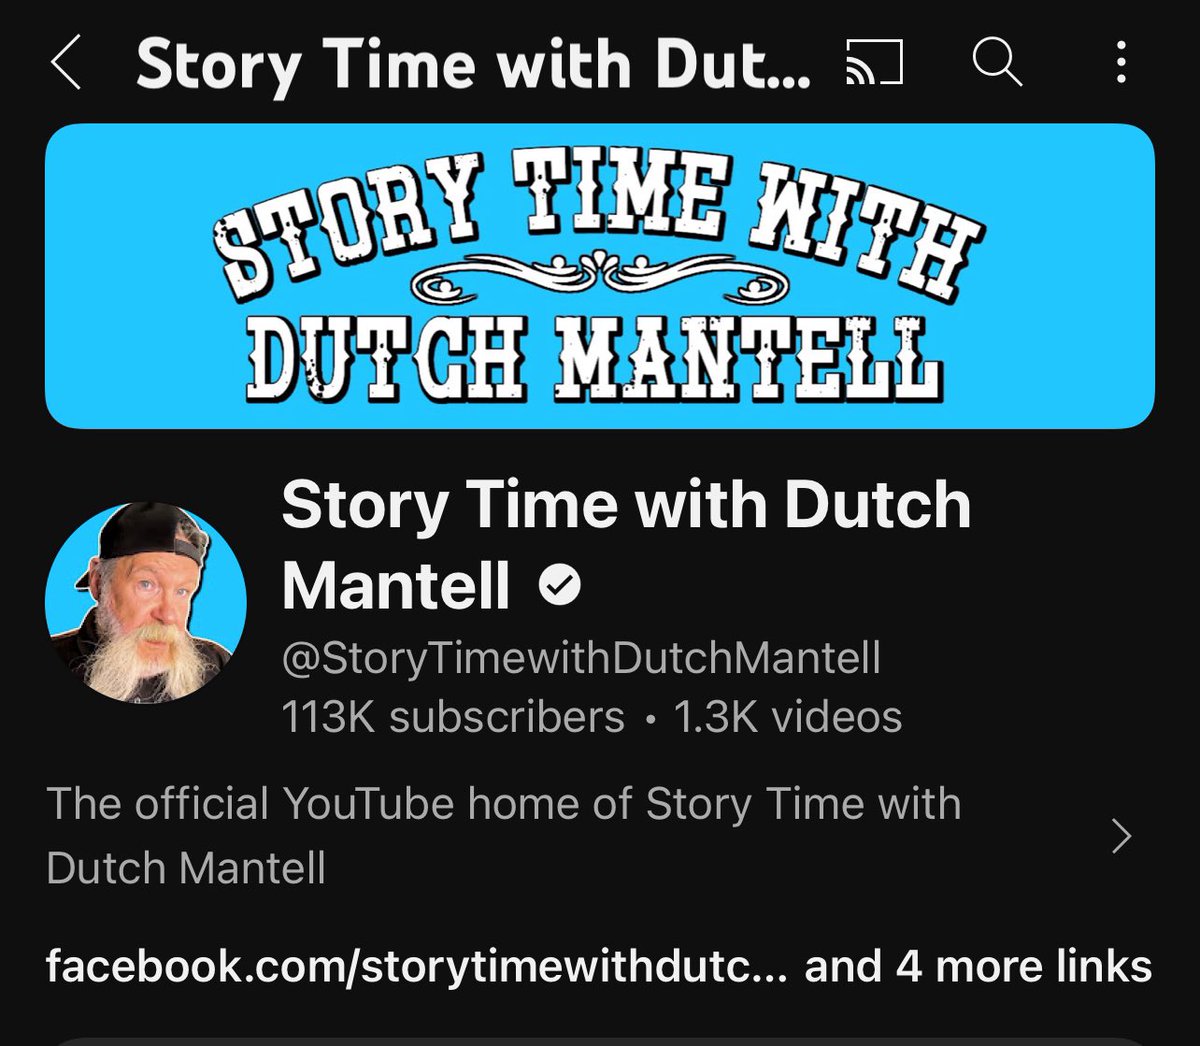 BREAKING NEWS: US Government to Cancel VISAs for 20 CMLL Wrestlers; AEW/CMLL Plans in Jeopardy. Wanna know what this REAL AMERICAN thinks? Tune in to my podcast and find out. #StoryTimeWithDutch on YouTube and subscribe. @WSI_YouTube